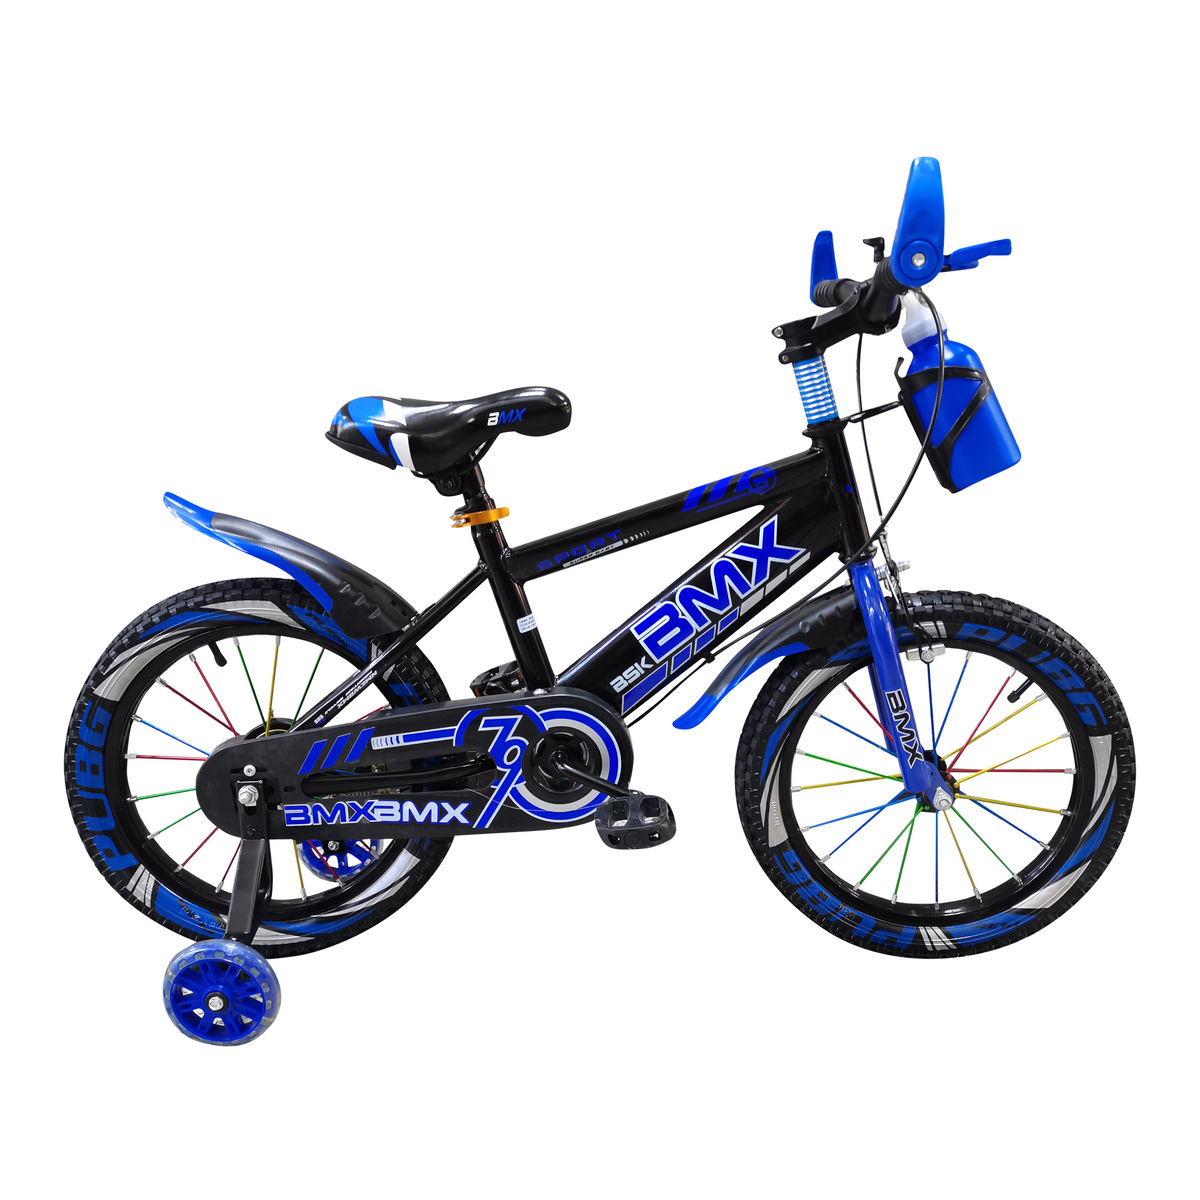 Kinetic Kids Bicycle 16inch A900216 Assorted Color